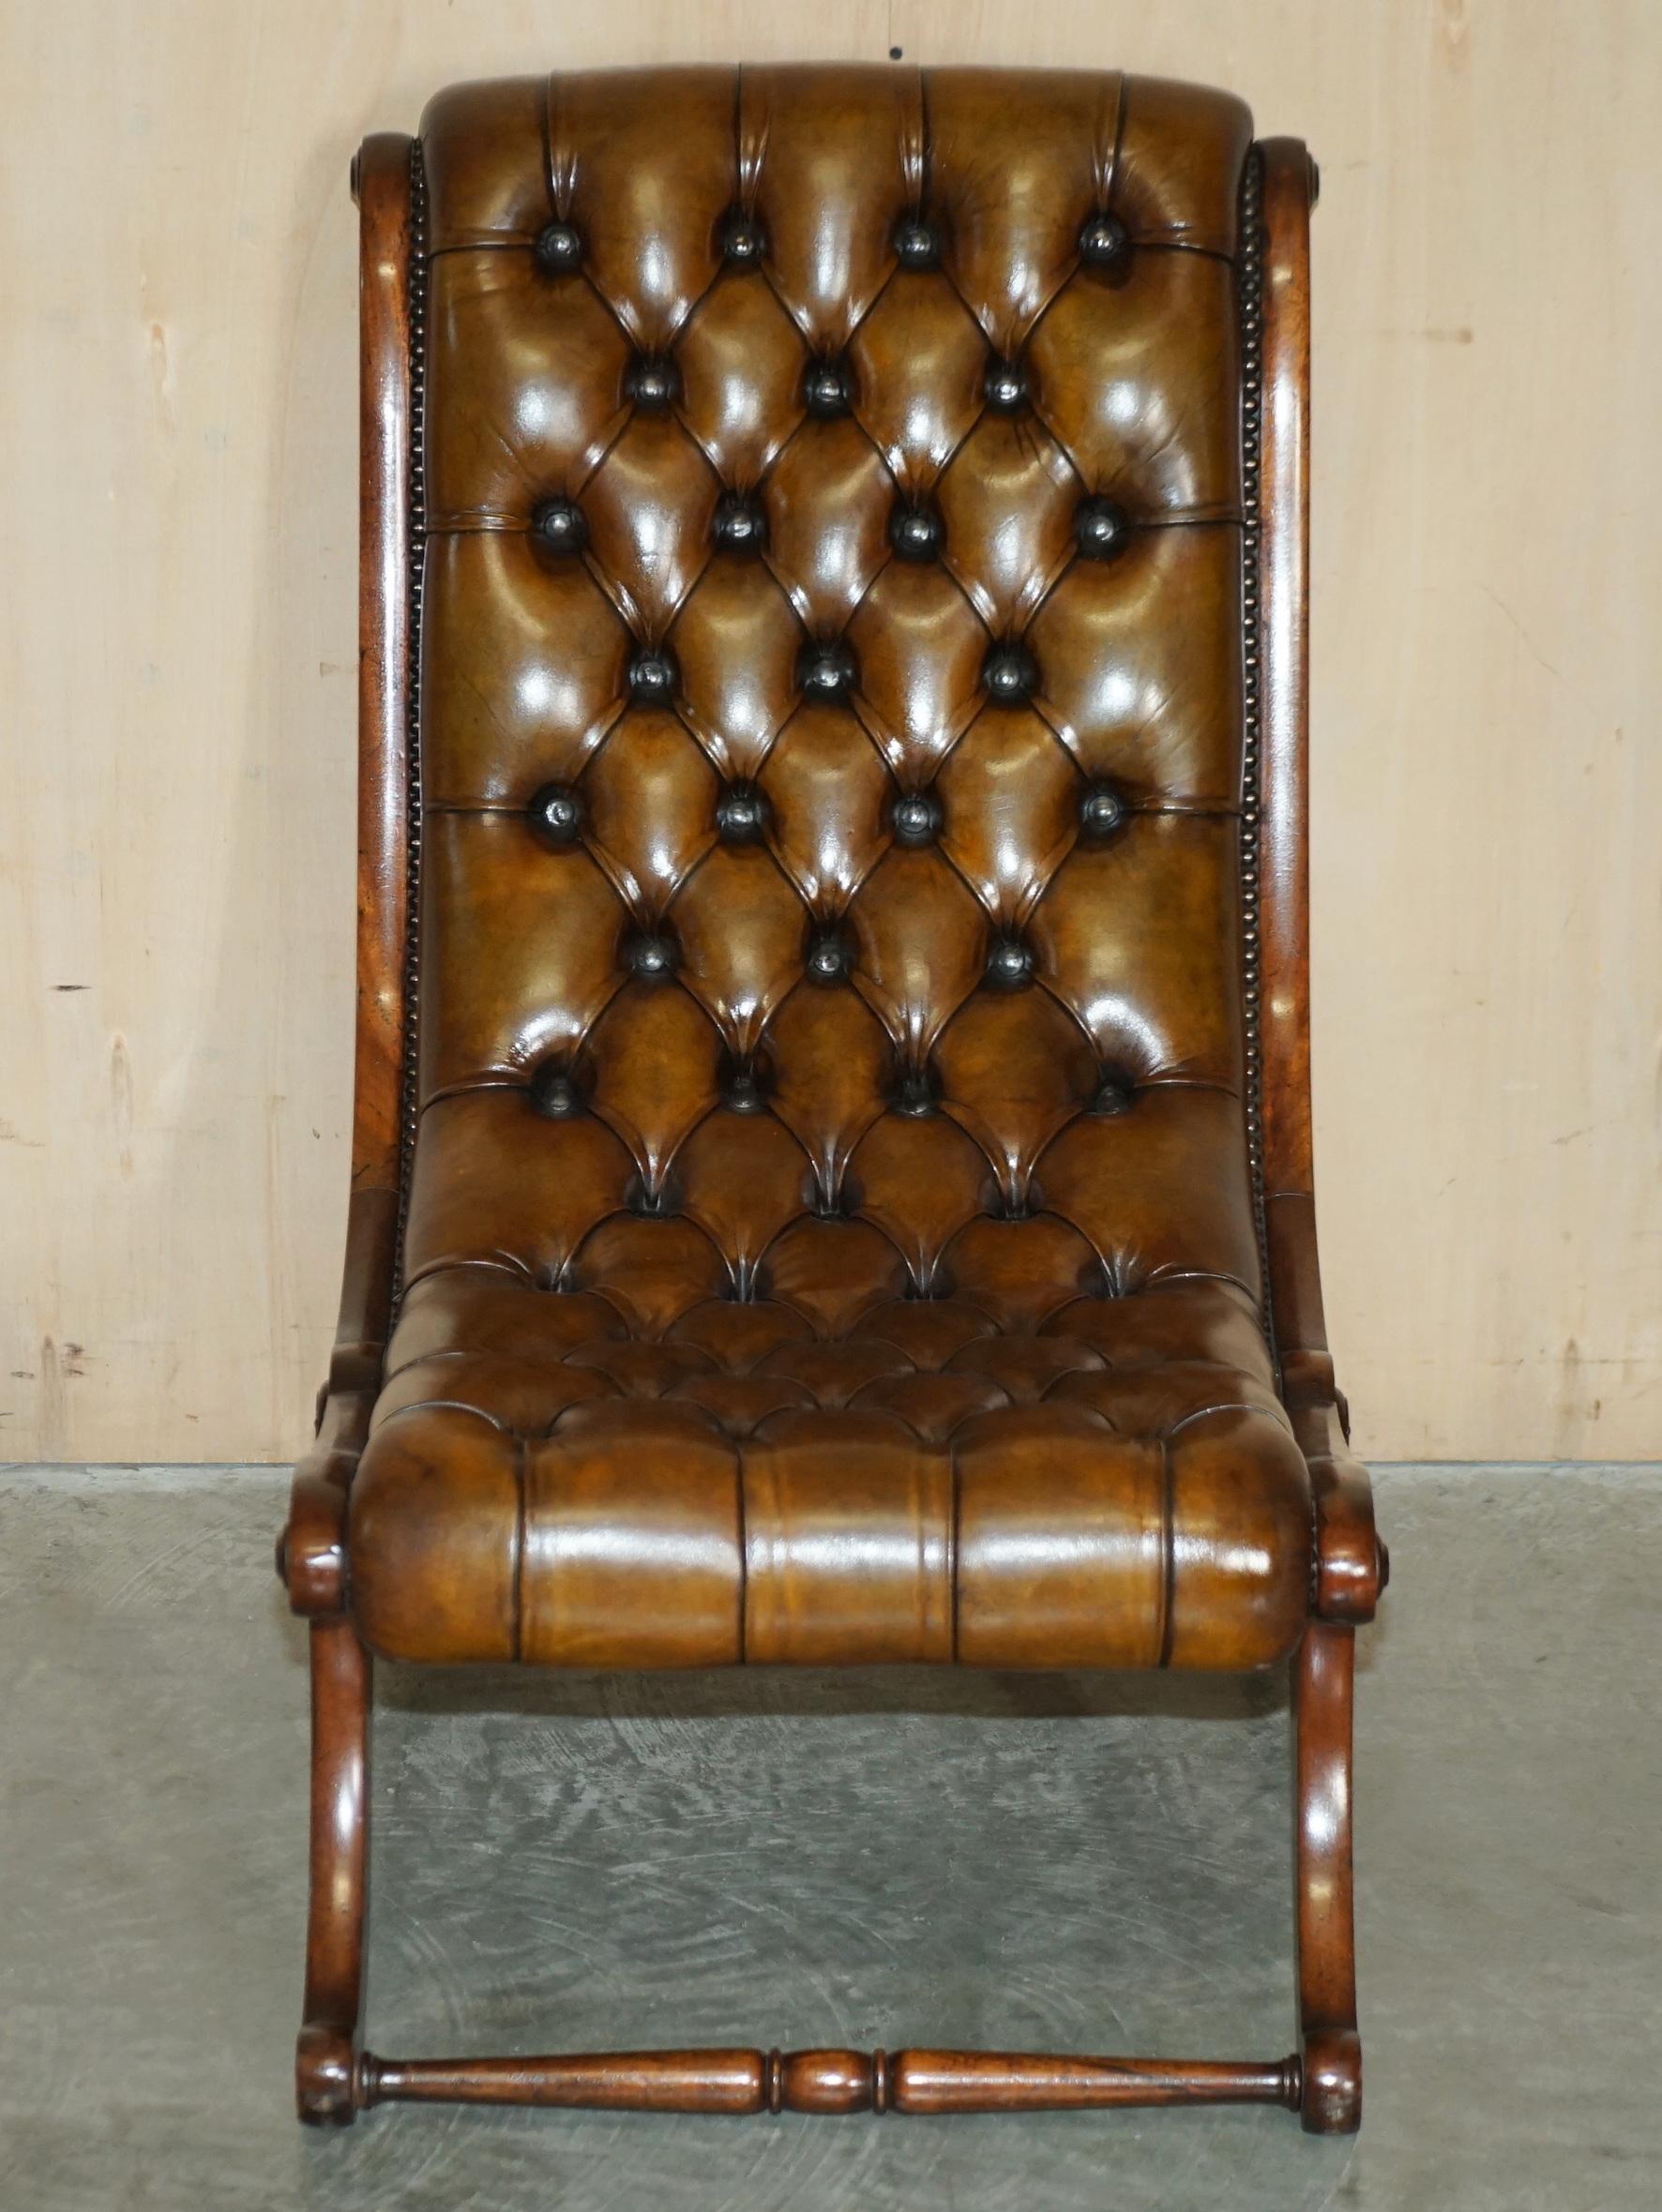 We are delighted to offer for sale this absolutely stunning, circa 1900 fully restored Chesterfield tufted library slipper chair

A very rare find, I never come across original slipper armchairs any more, ideally suited for somewhere you take off